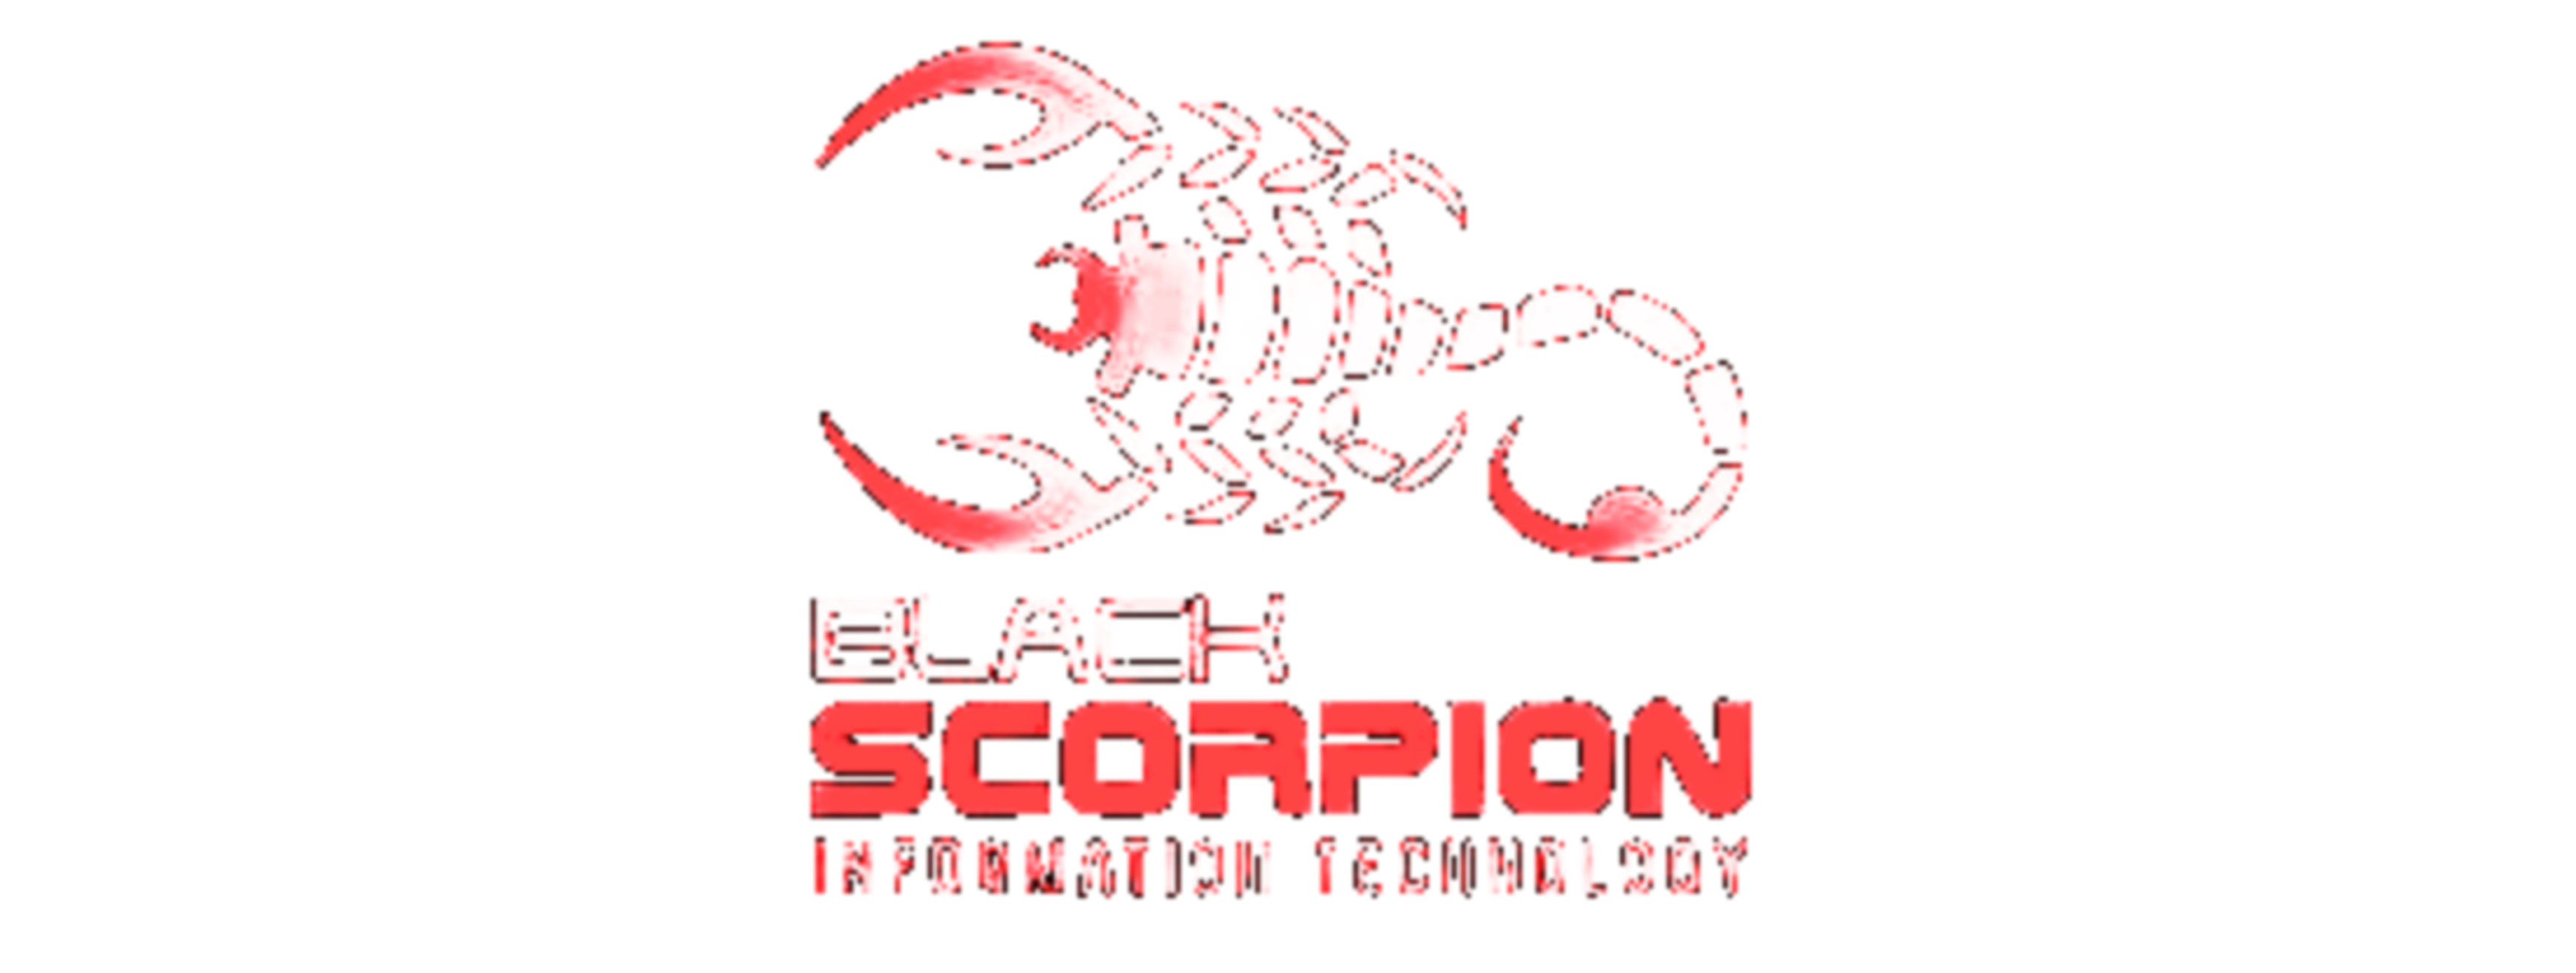 Scorpion Black And White Clipart Images For Free Download - Pngtree